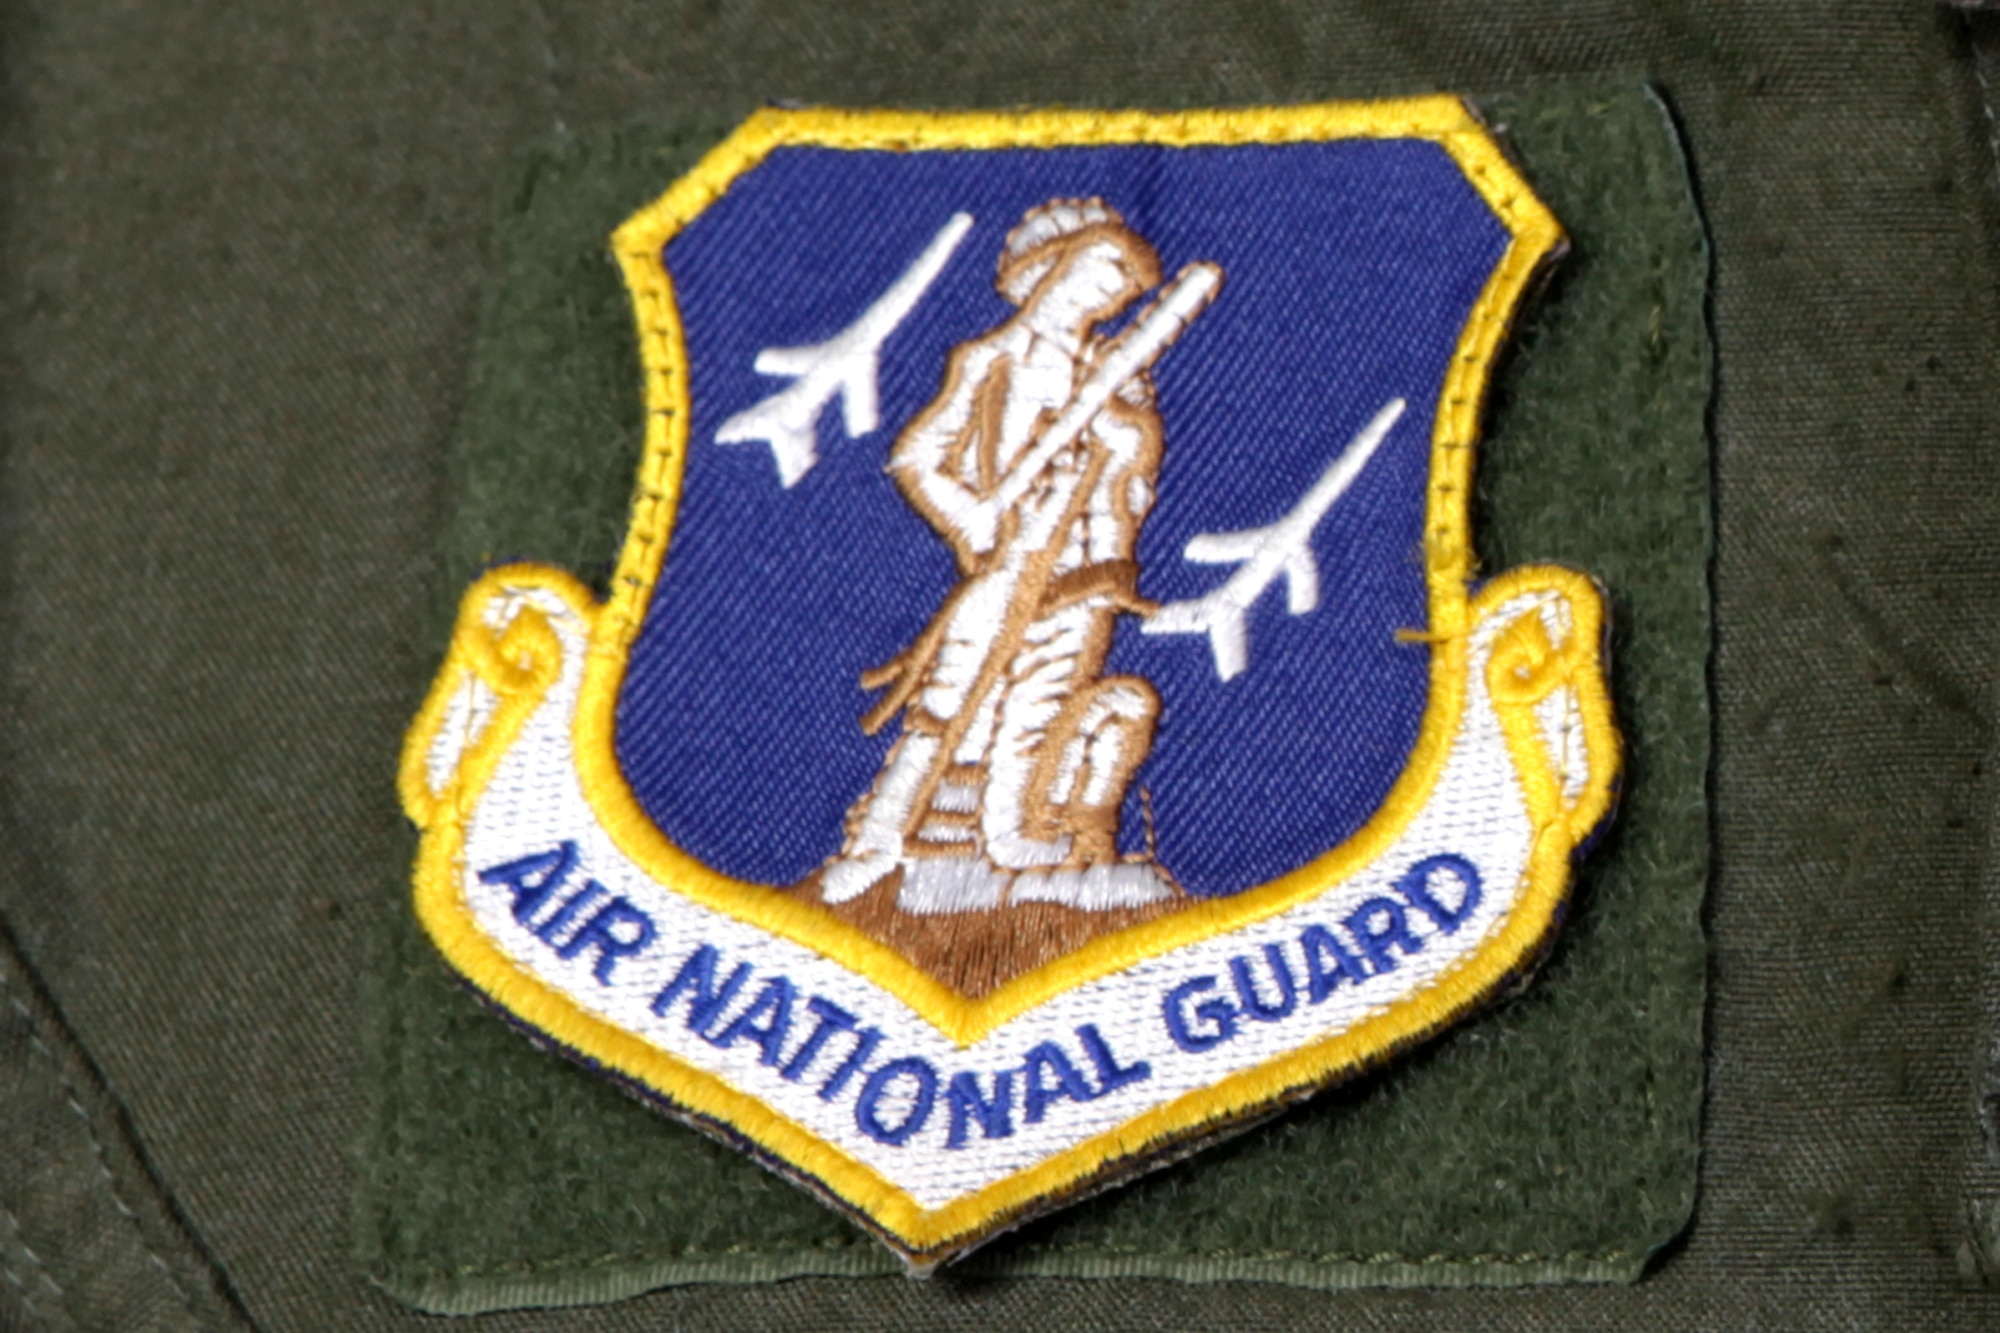 The Air National Guard patch is one of several patches worn by the pilots of the 107th Fighter Squadron, which is a component of the 127th Wing of the Michigan Air National Guard. Unit patches and aircraft insignia help build unit esprit de corps. (Air National Guard photo by Brittani Baisden)